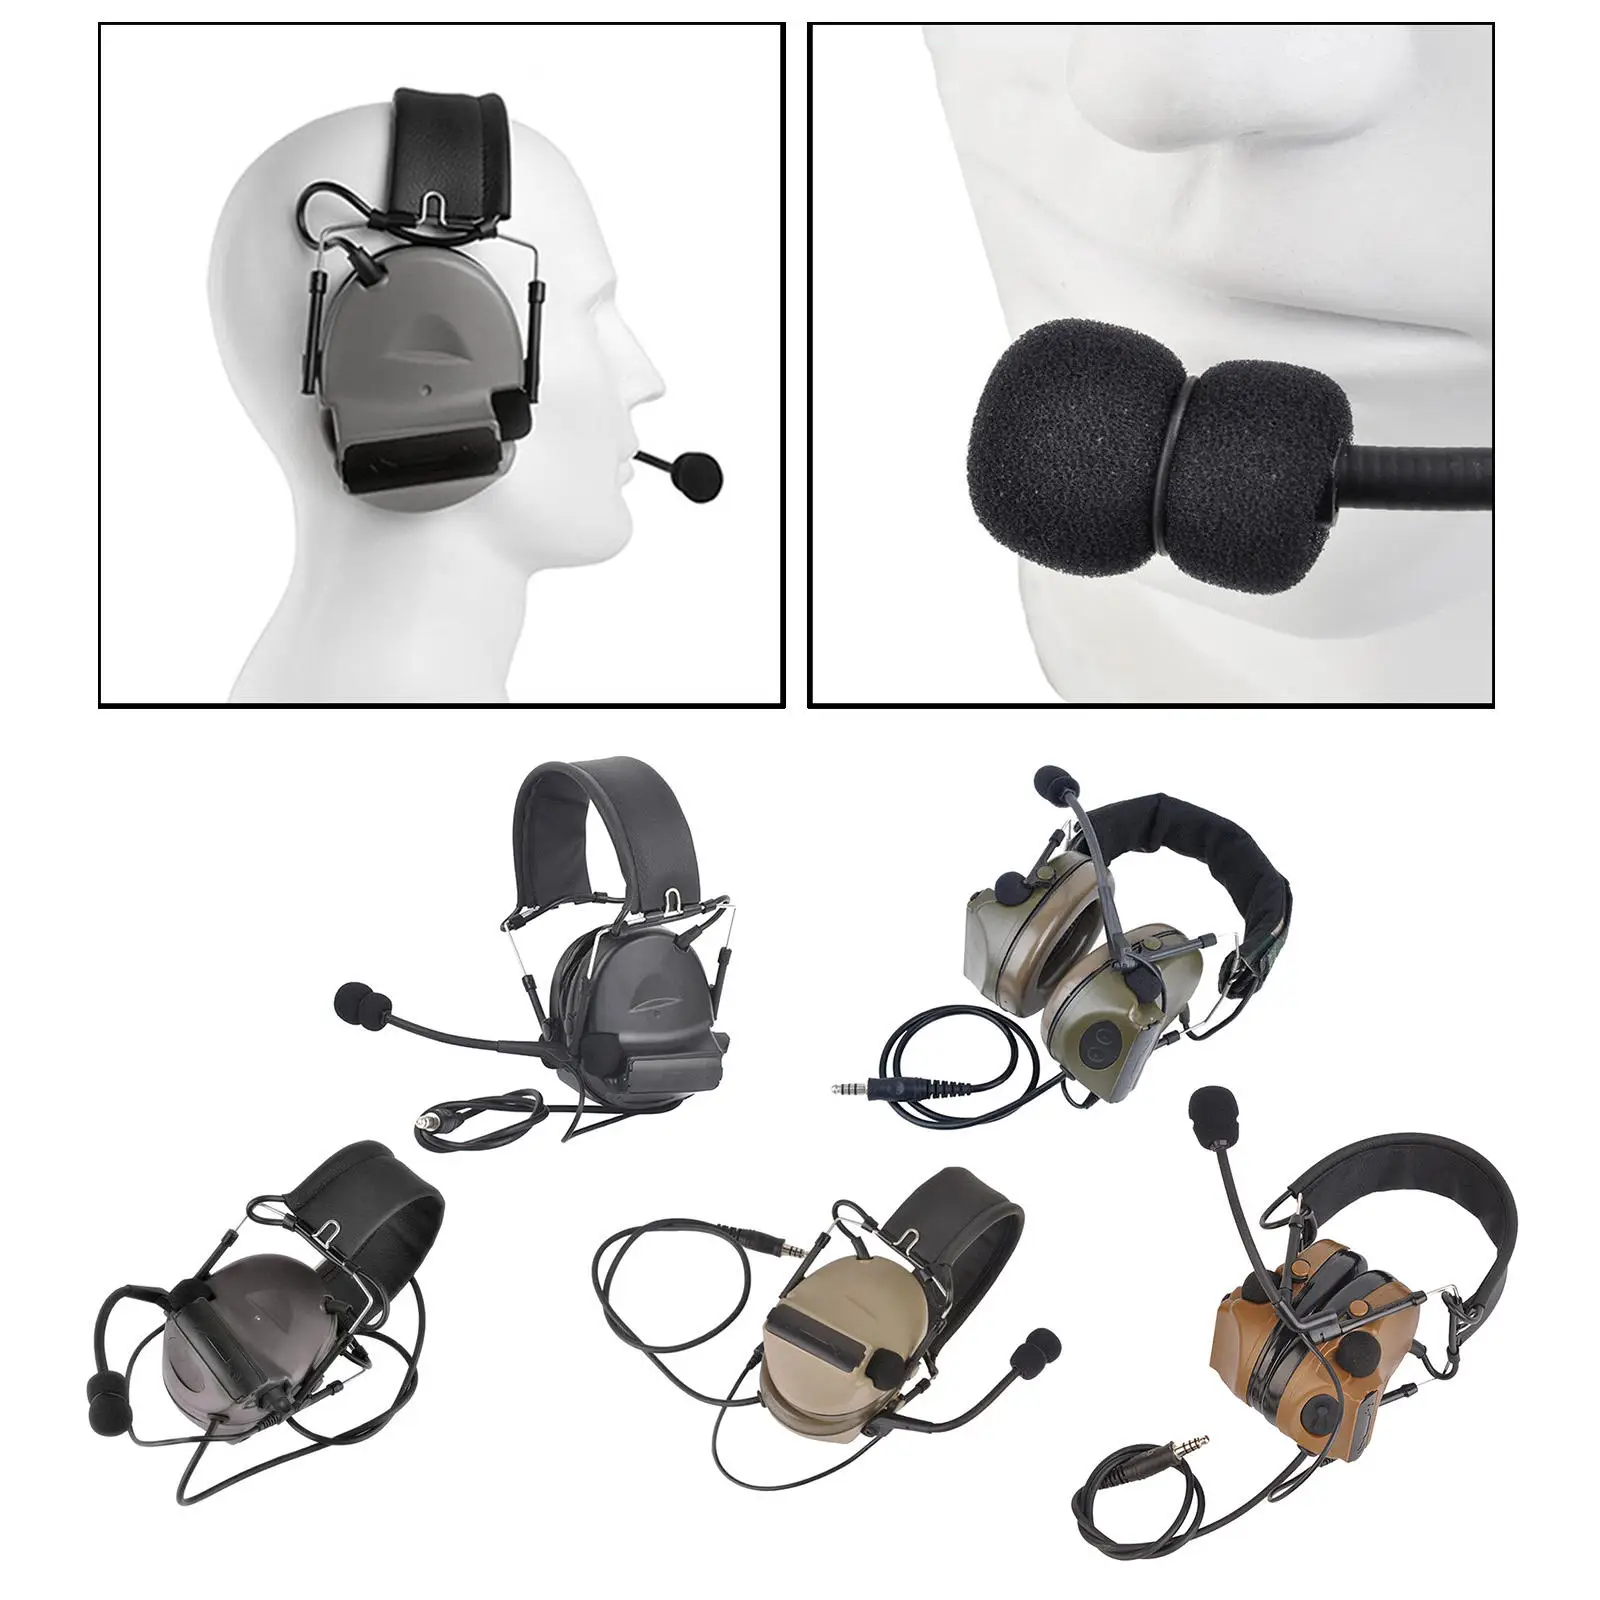 Tactical Headset Wargame Hunting Headphone for Military Radio Walkie Talkie with Noise Cancellation Function